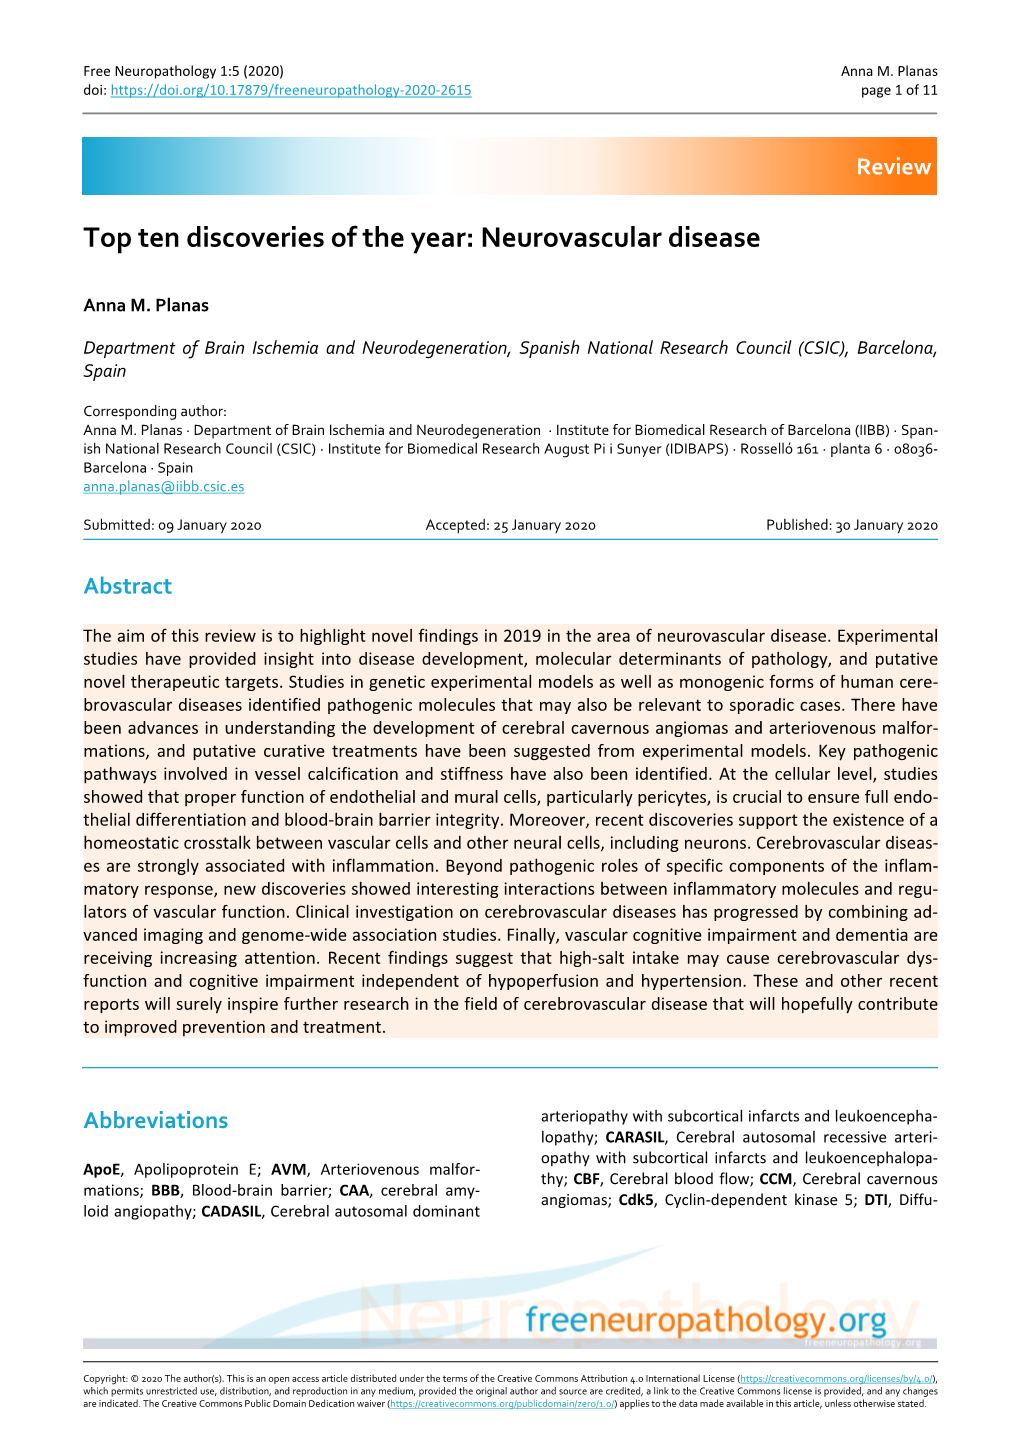 Top Ten Discoveries of the Year: Neurovascular Disease